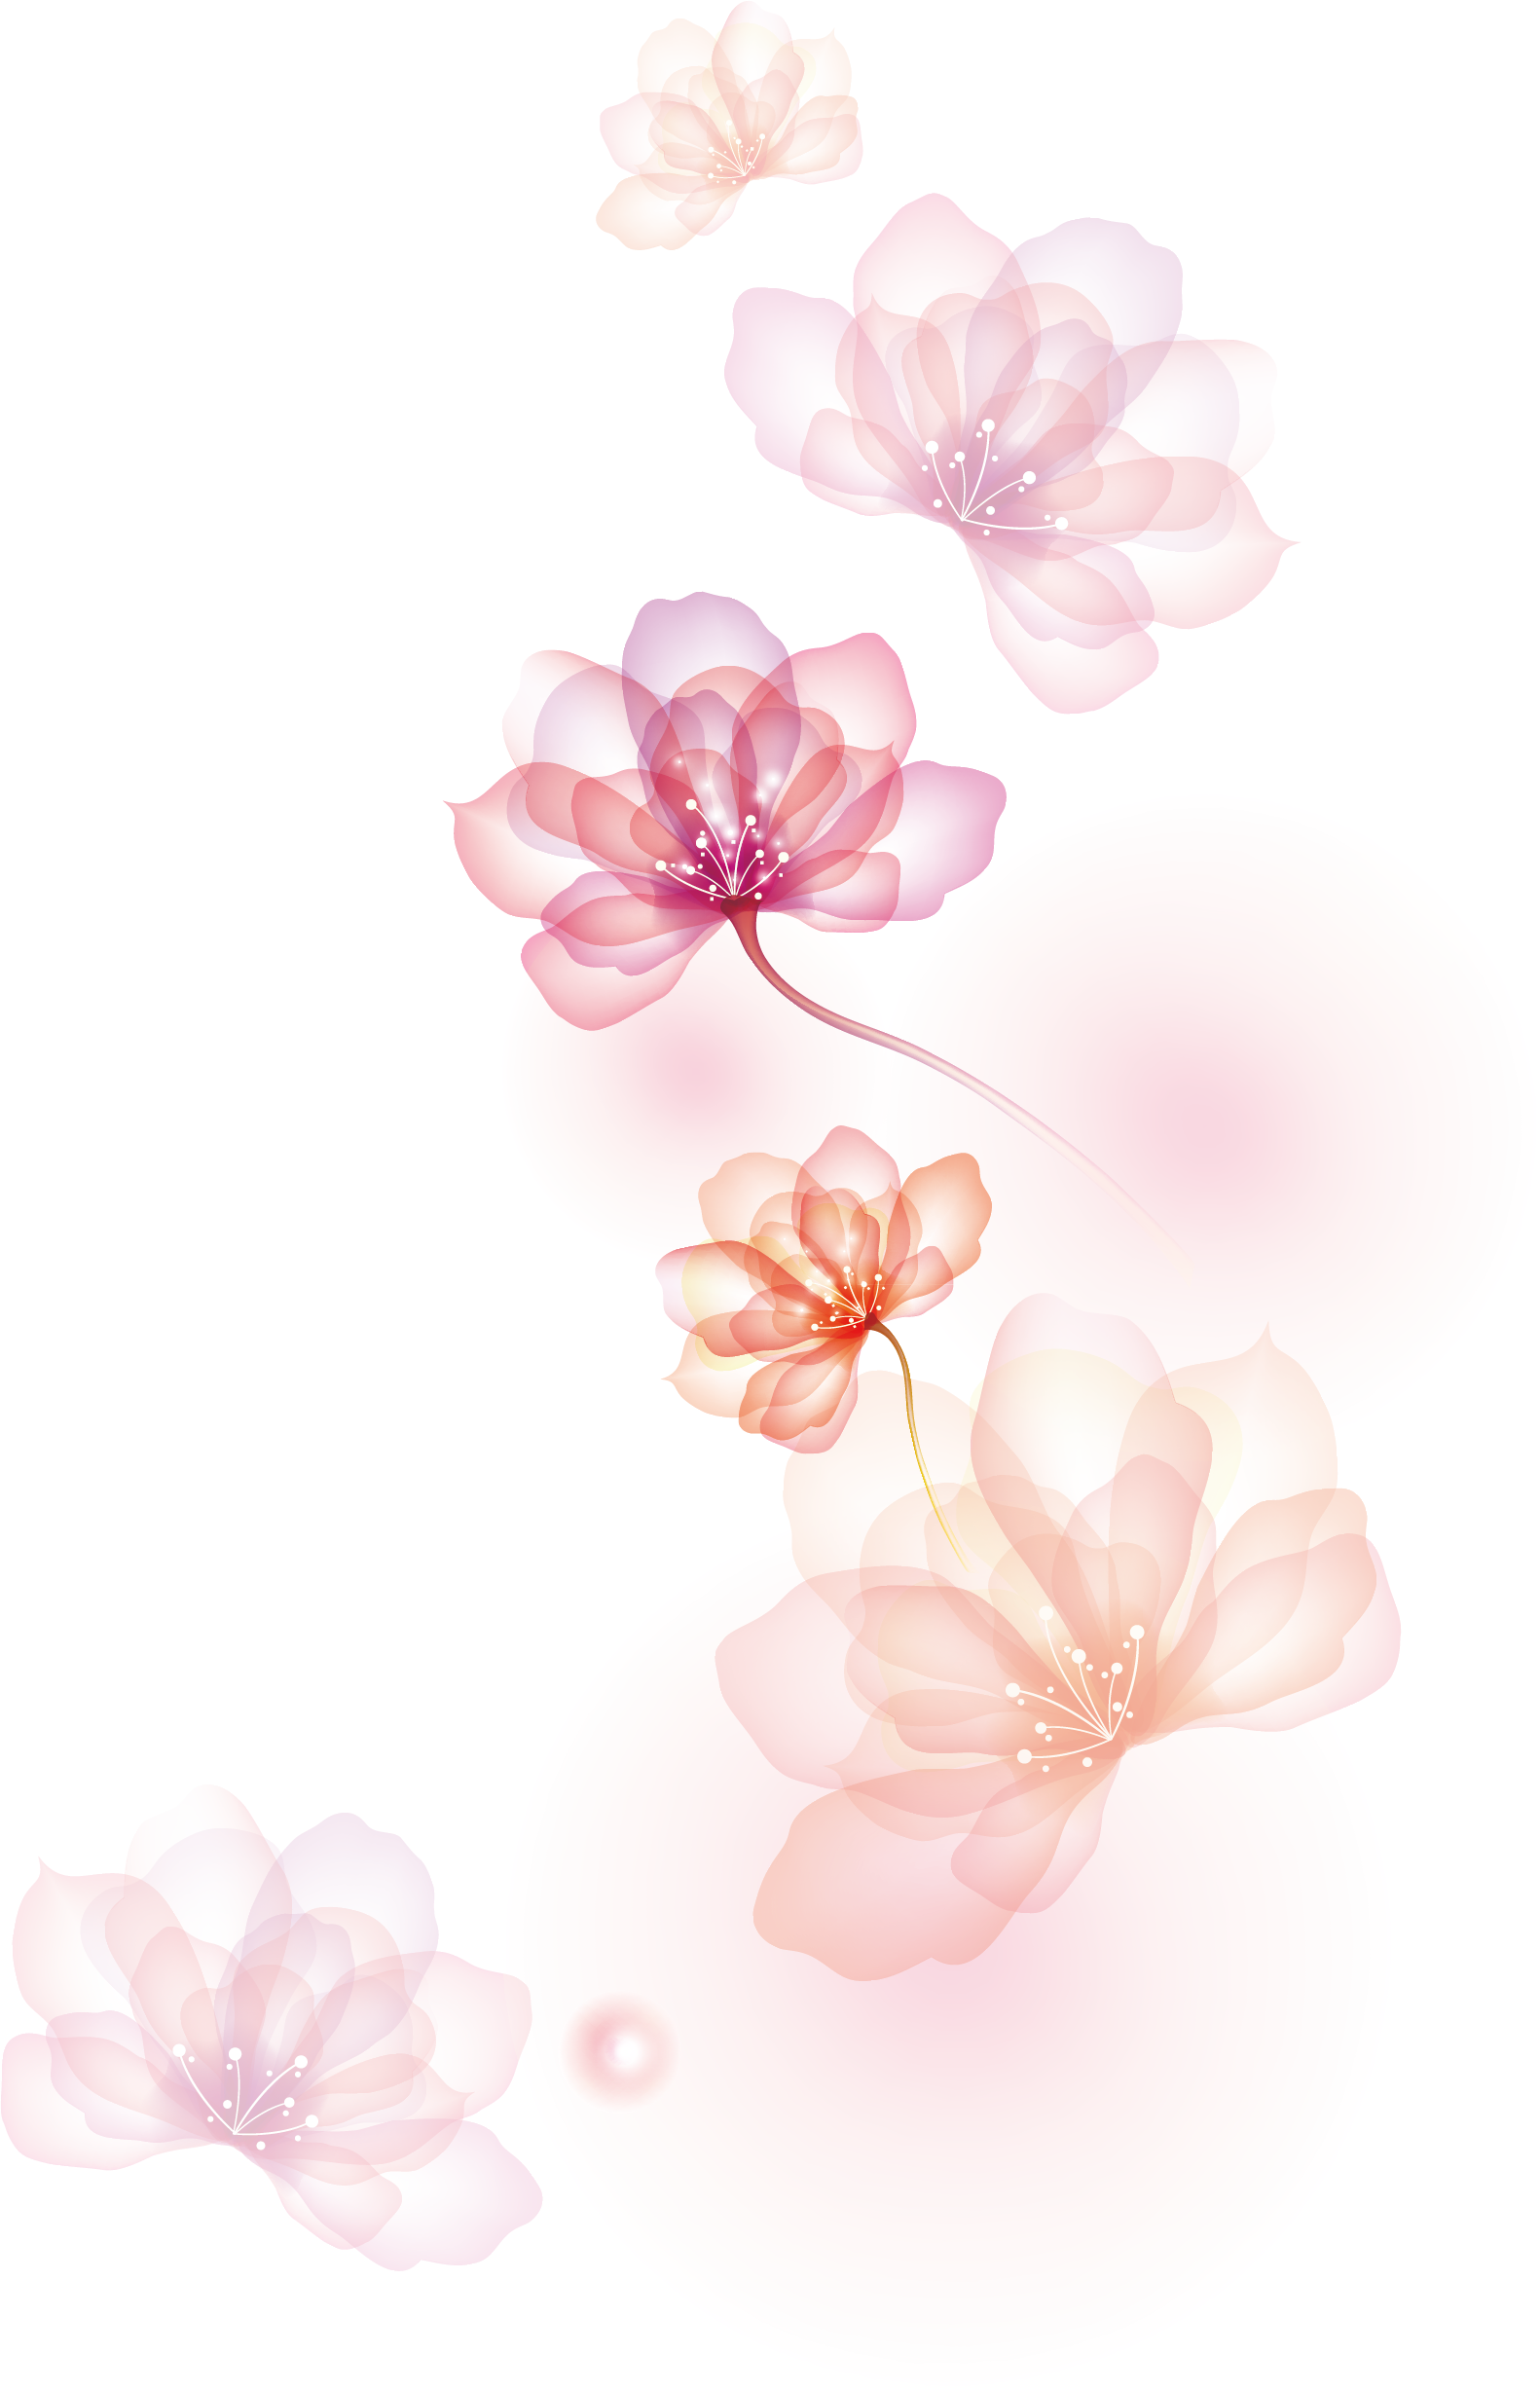 Scatters Flowers Flower Victory Icon Free Transparent Image HQ Clipart